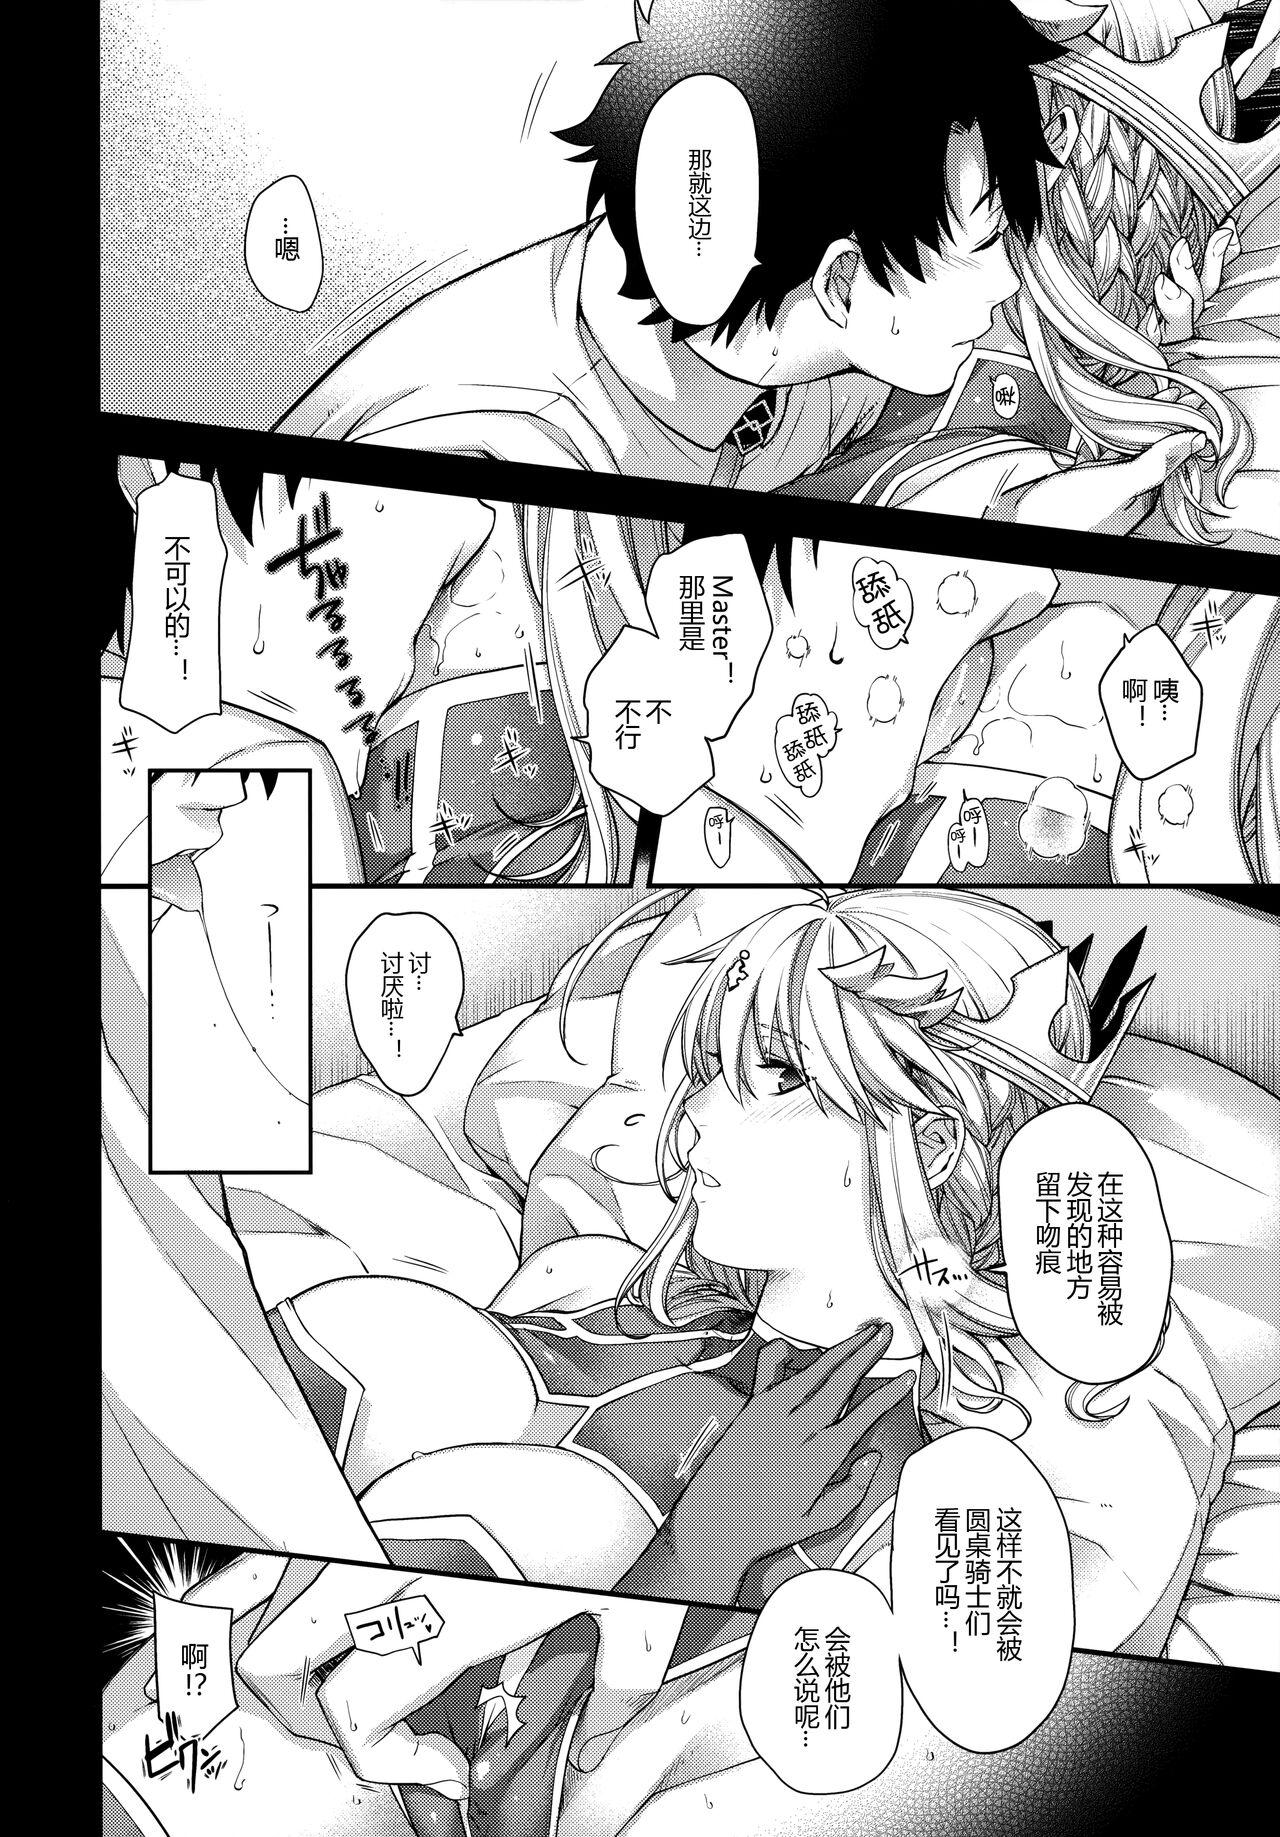 Hidden Camera Royal syndrome - Fate grand order Free Hardcore Porn - Page 9